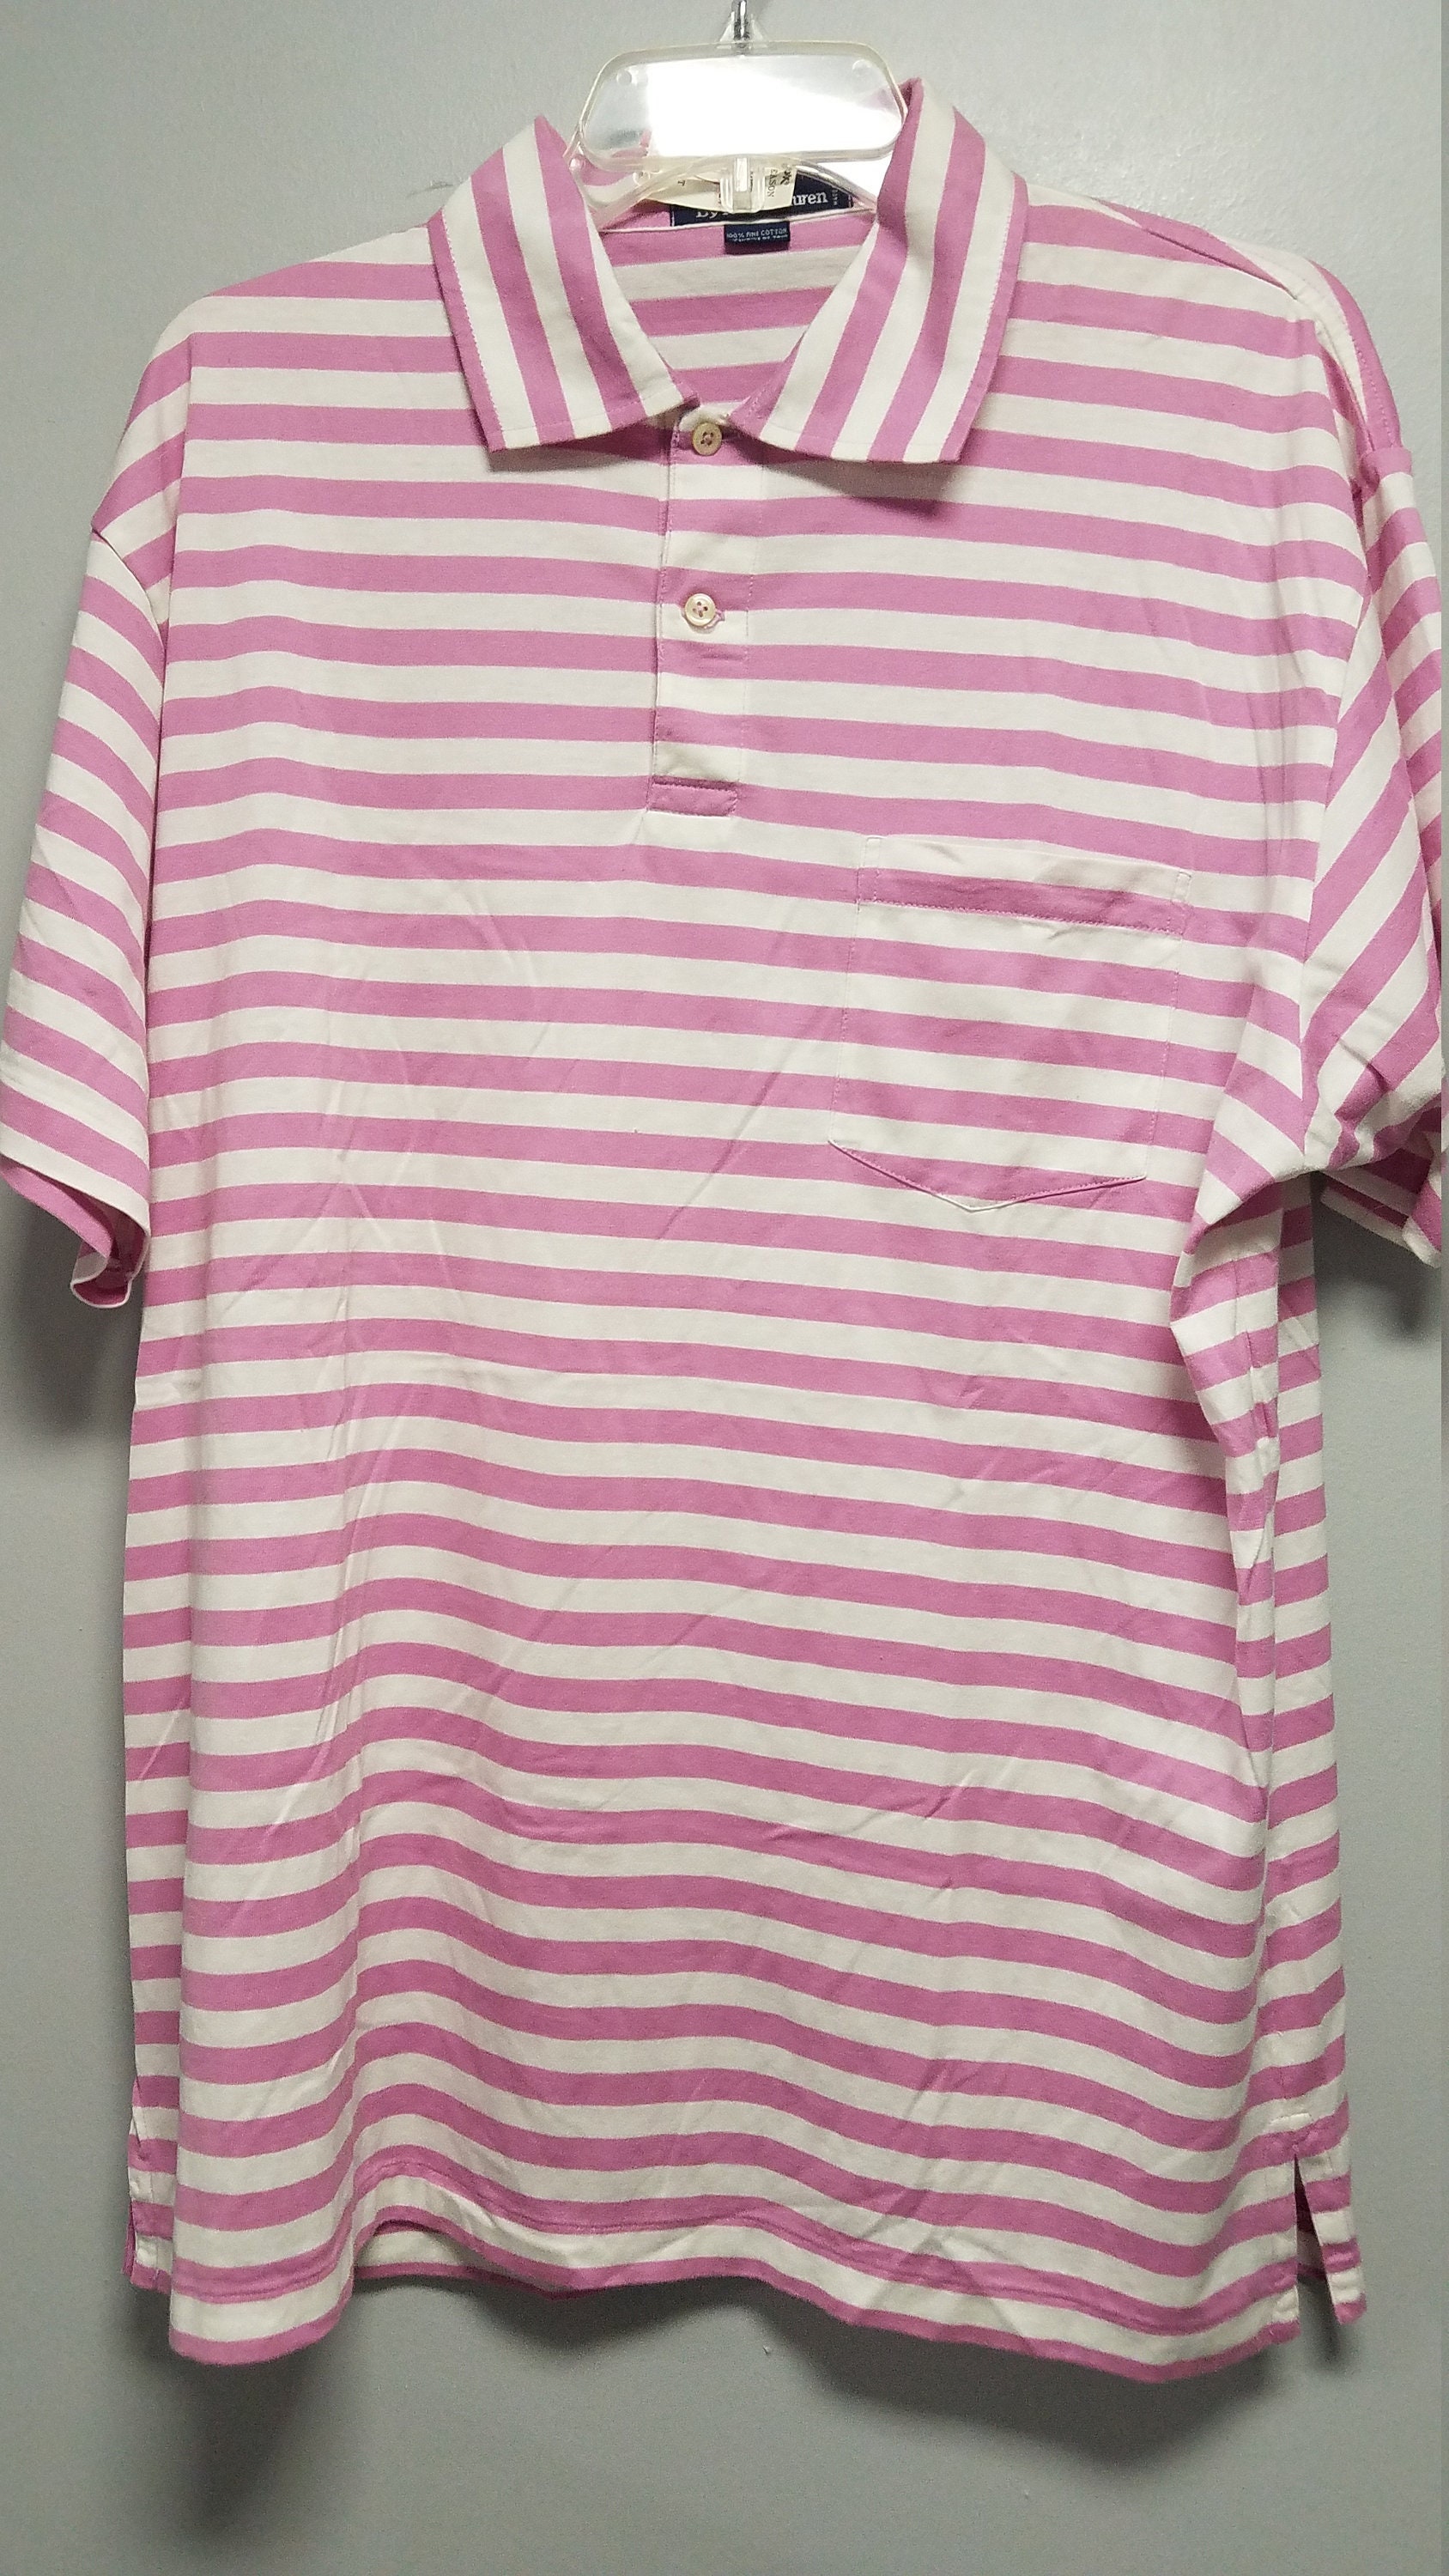 Vintage Men's Short Sleeve Shirt by POLO Exclusive Trim From the